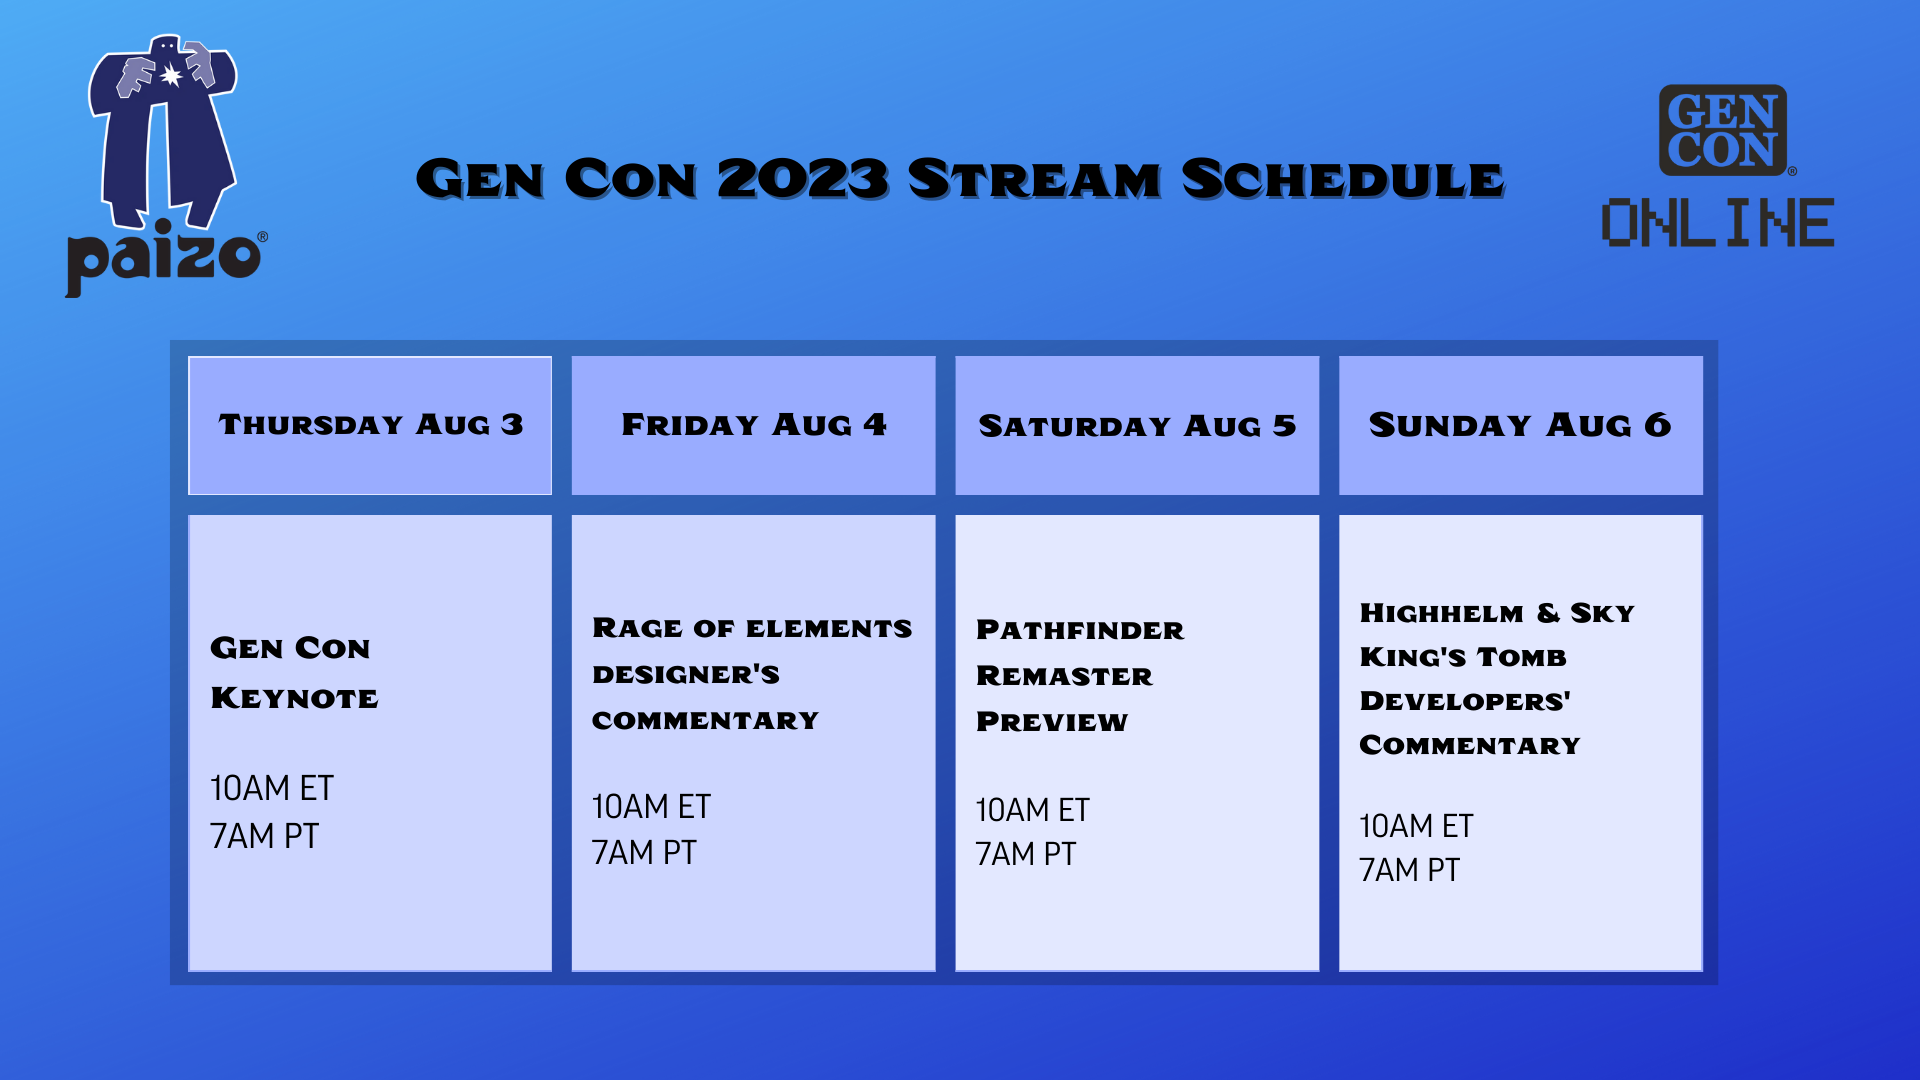 A graphic showing our panels scheduled for Gen Con